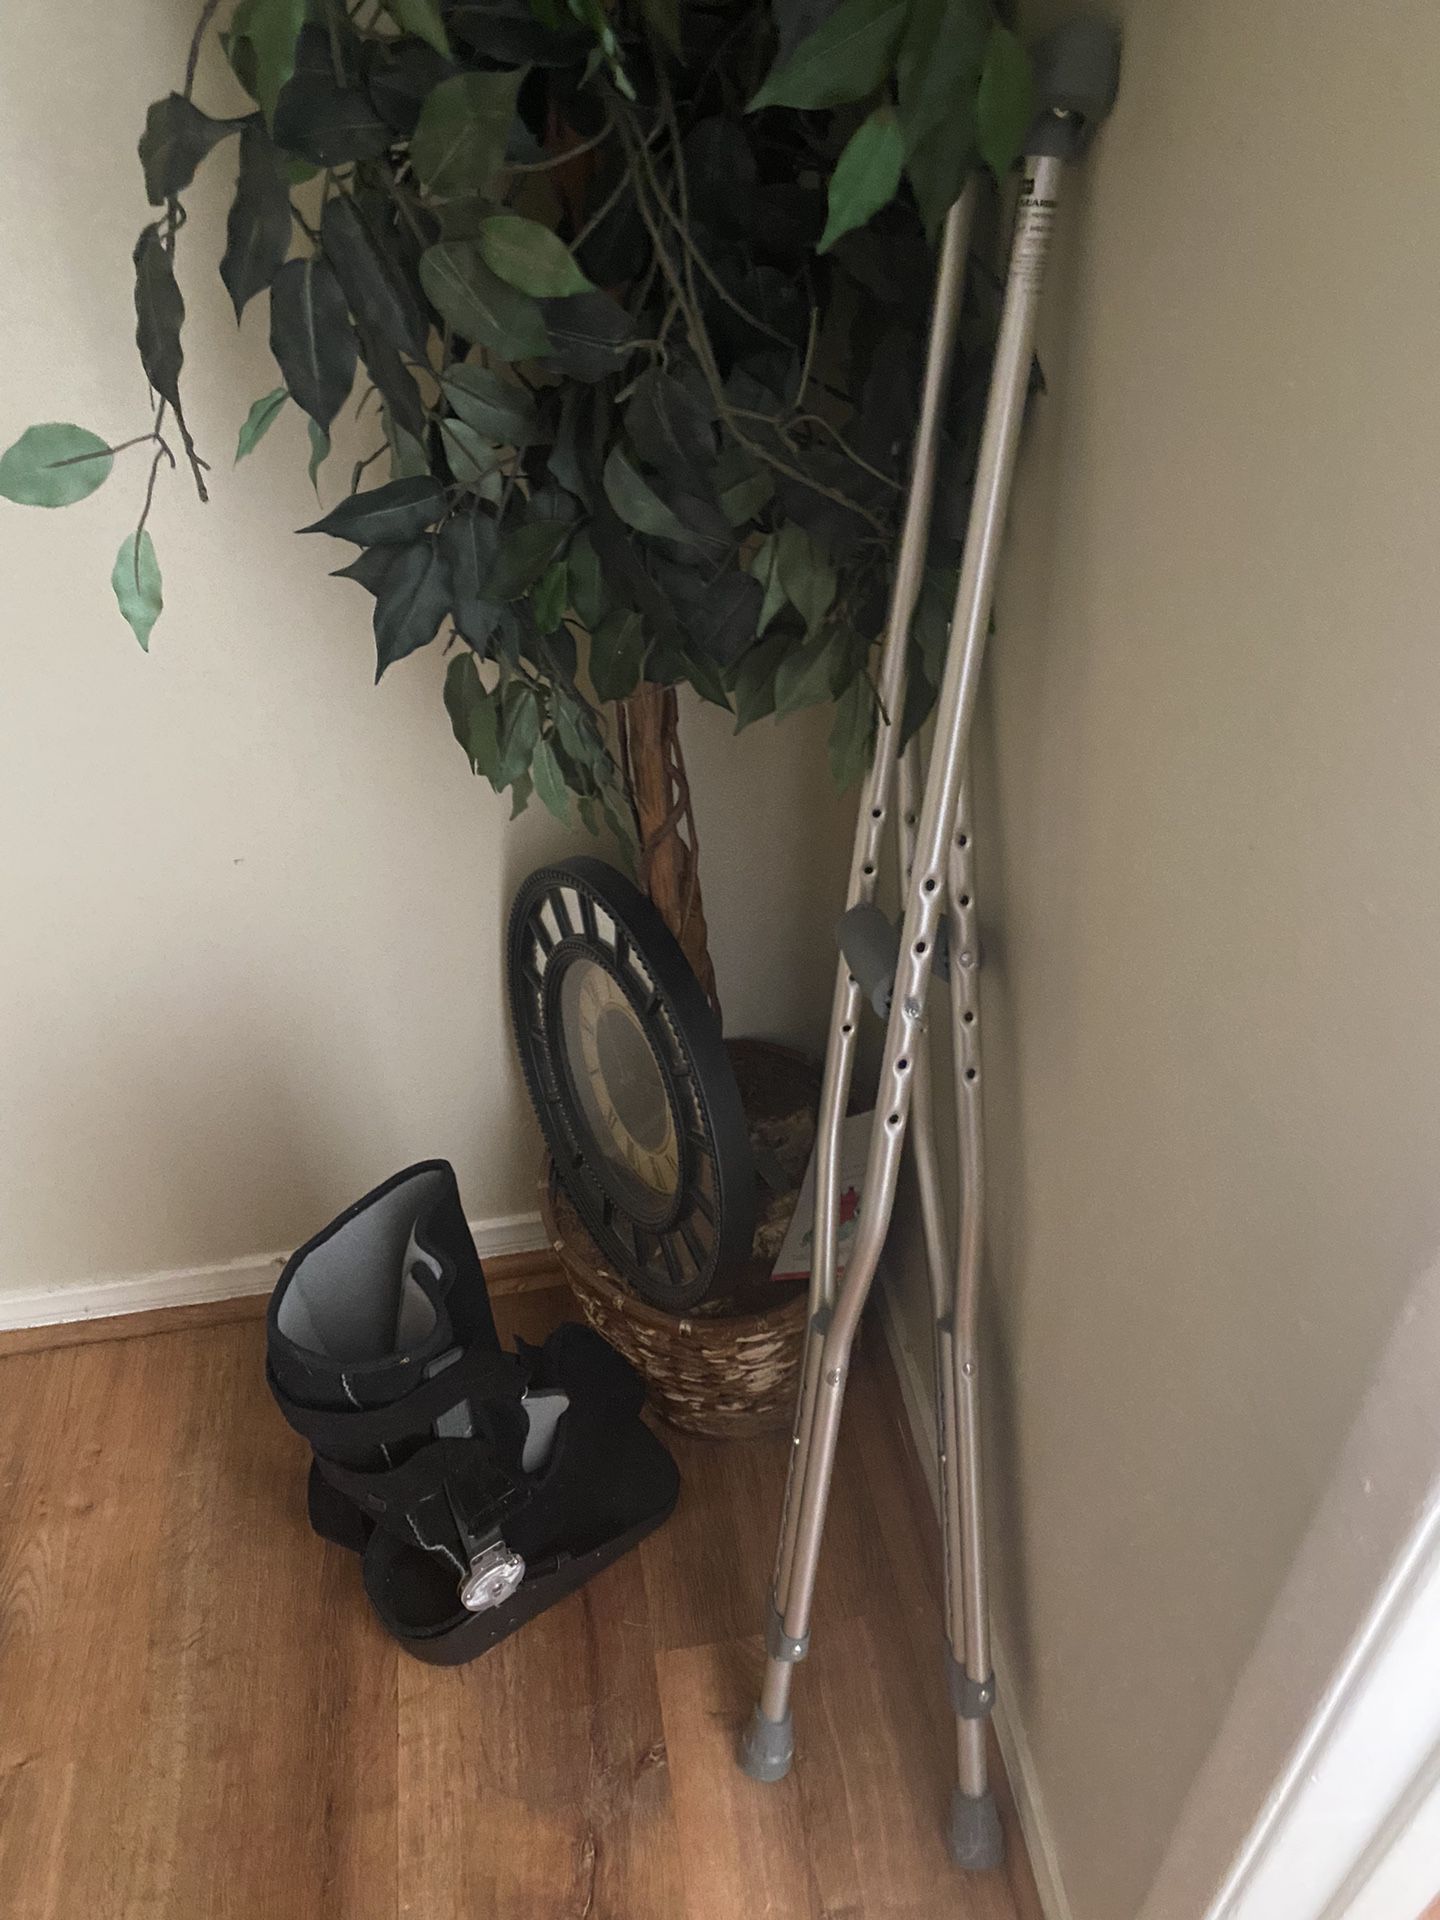 Lightly used crutches and boot